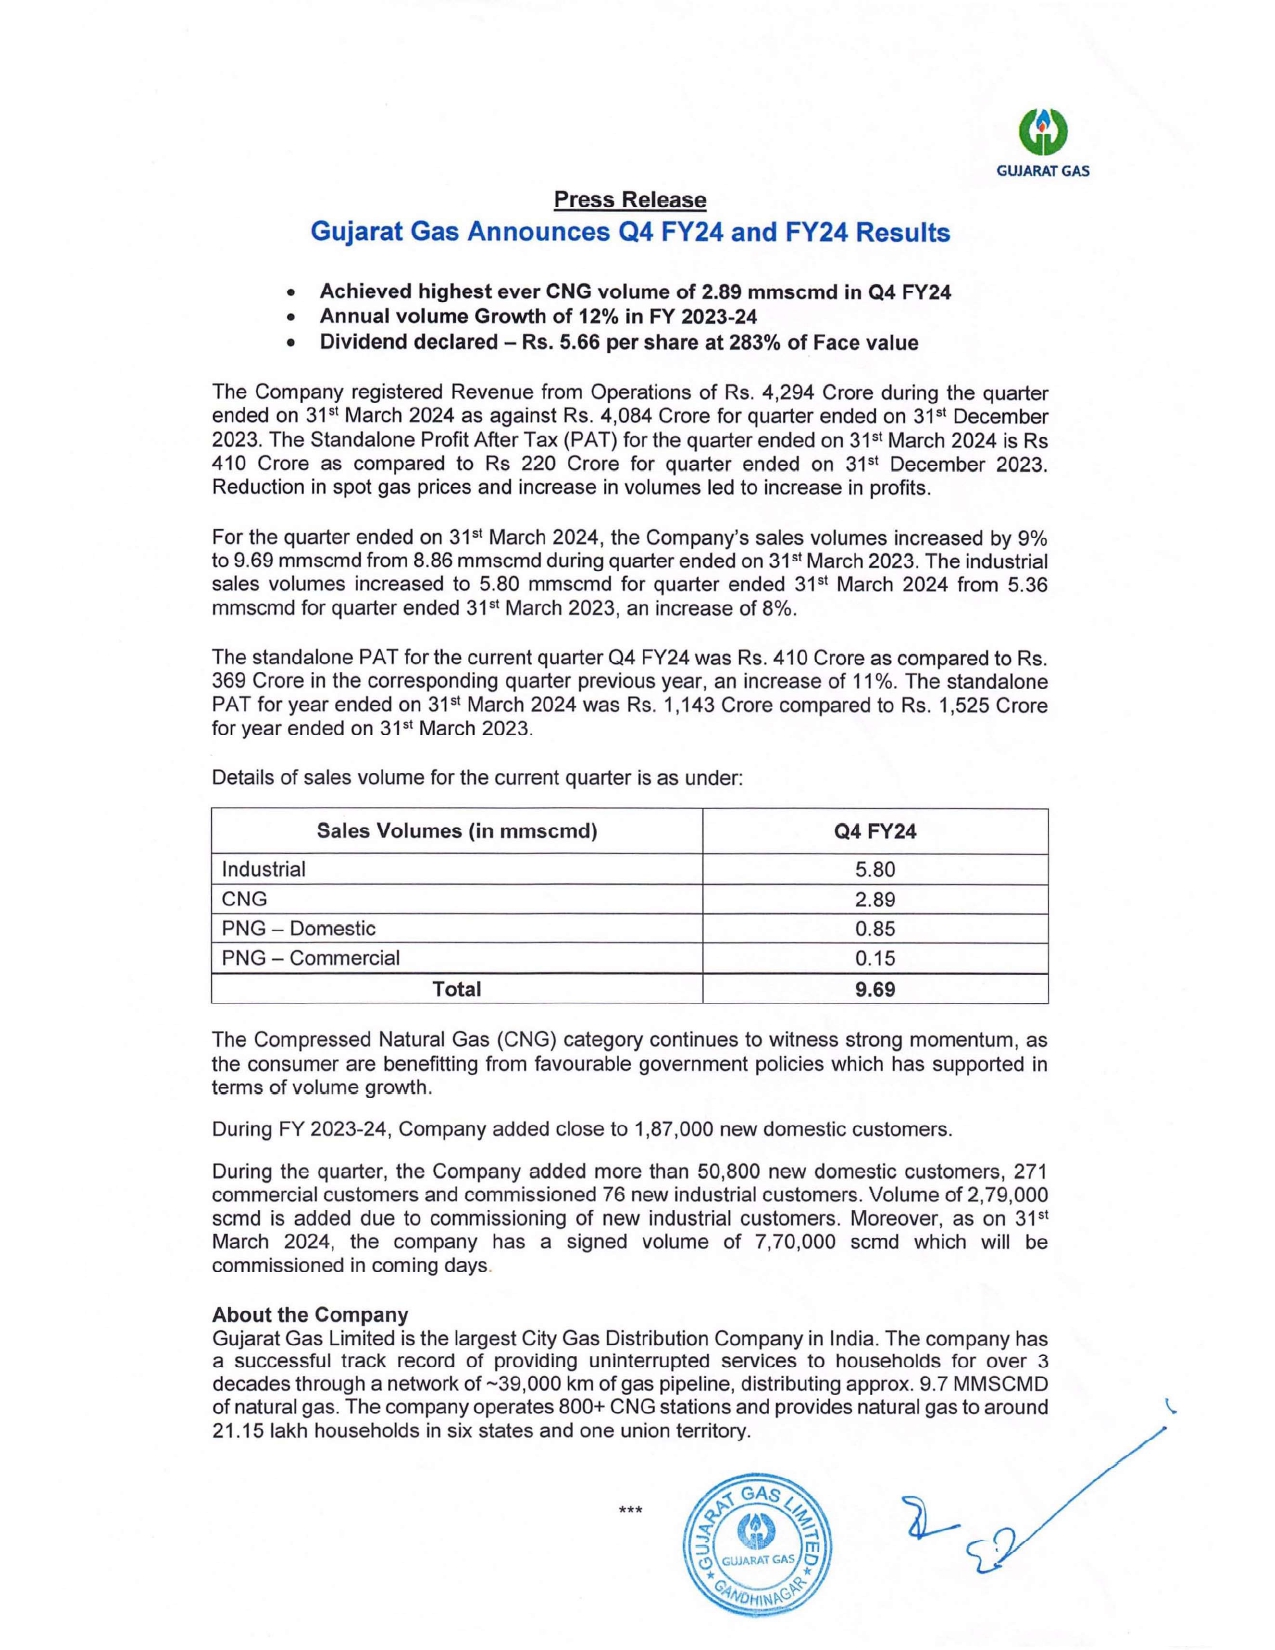 press-release-q4-fy-24-and-fy-2023-24-reults